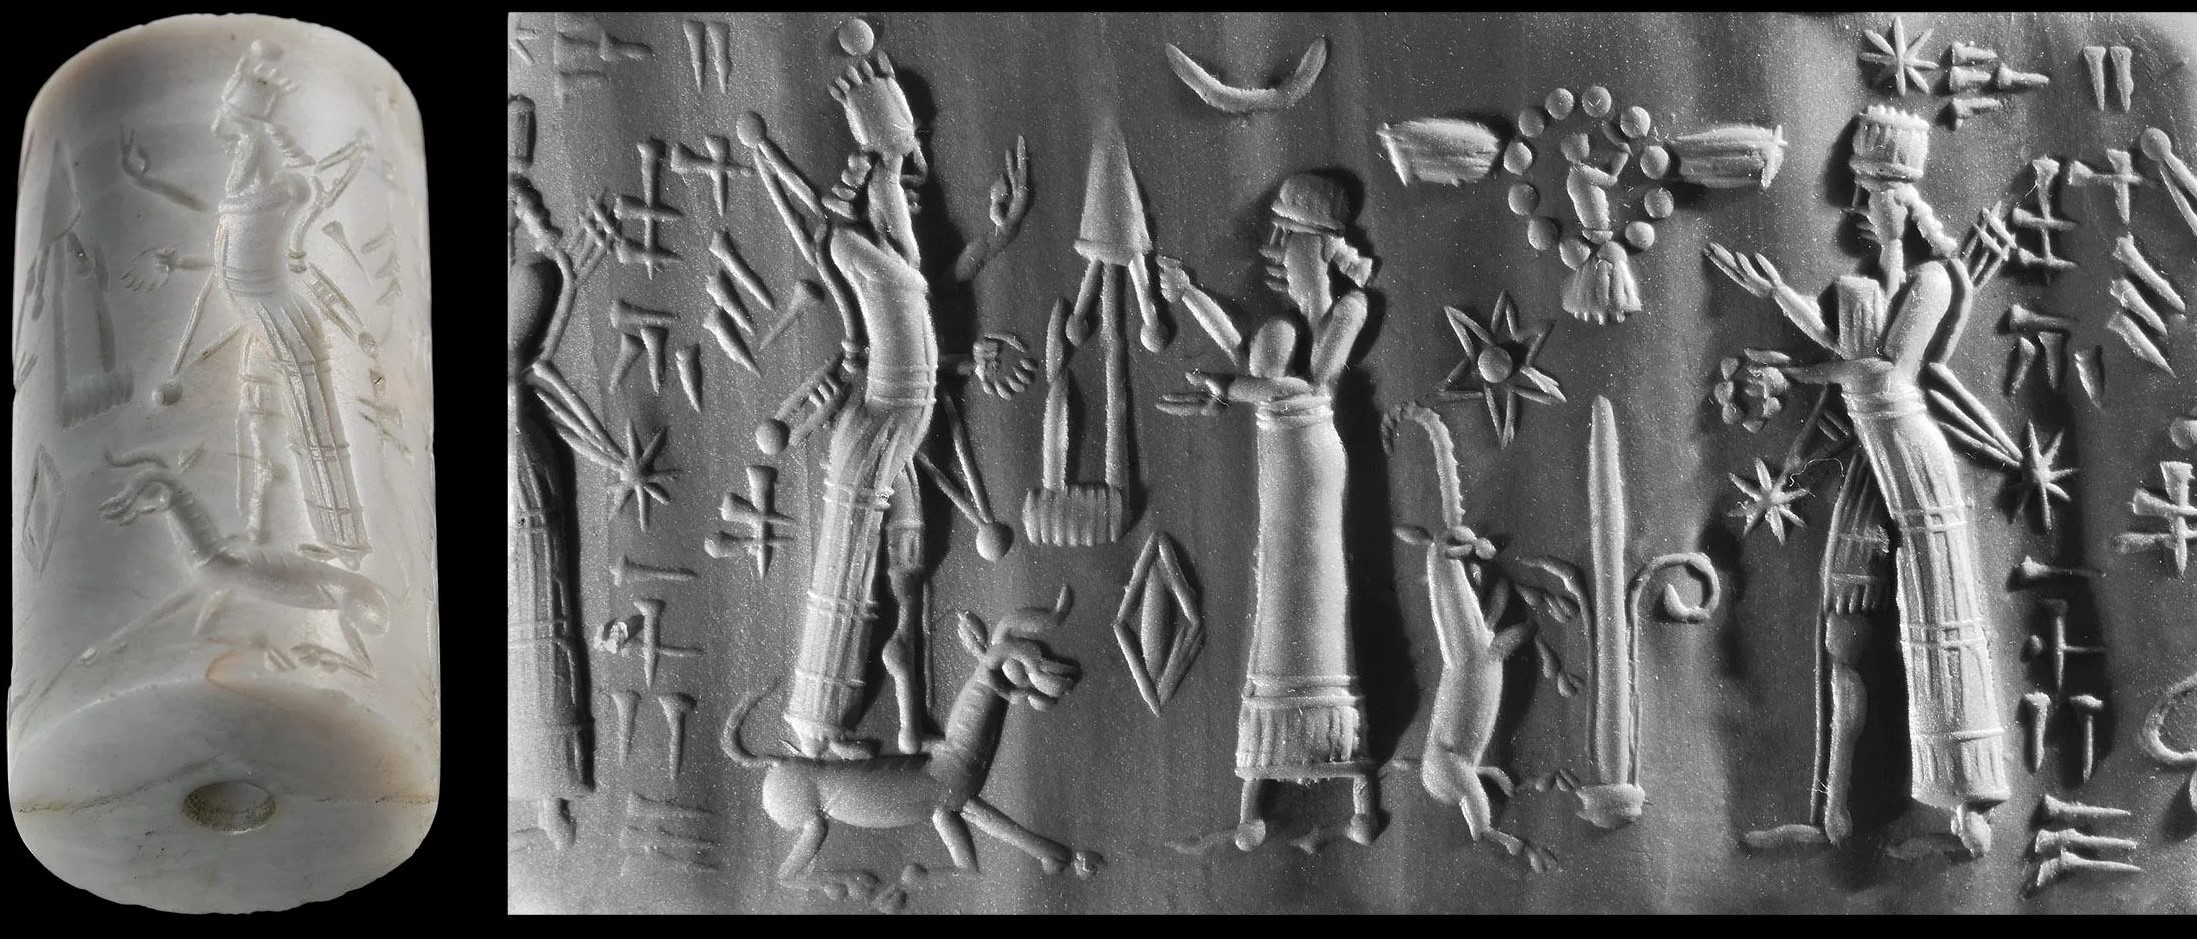 30 - Ninurta upon a bull, his mother Ninhursag giving advice, & Goddess of Love & War Inanna, with Utu in his Sun sky-disc / flying saucer above; the main royal gods had their own flying saucer to ger around Earth